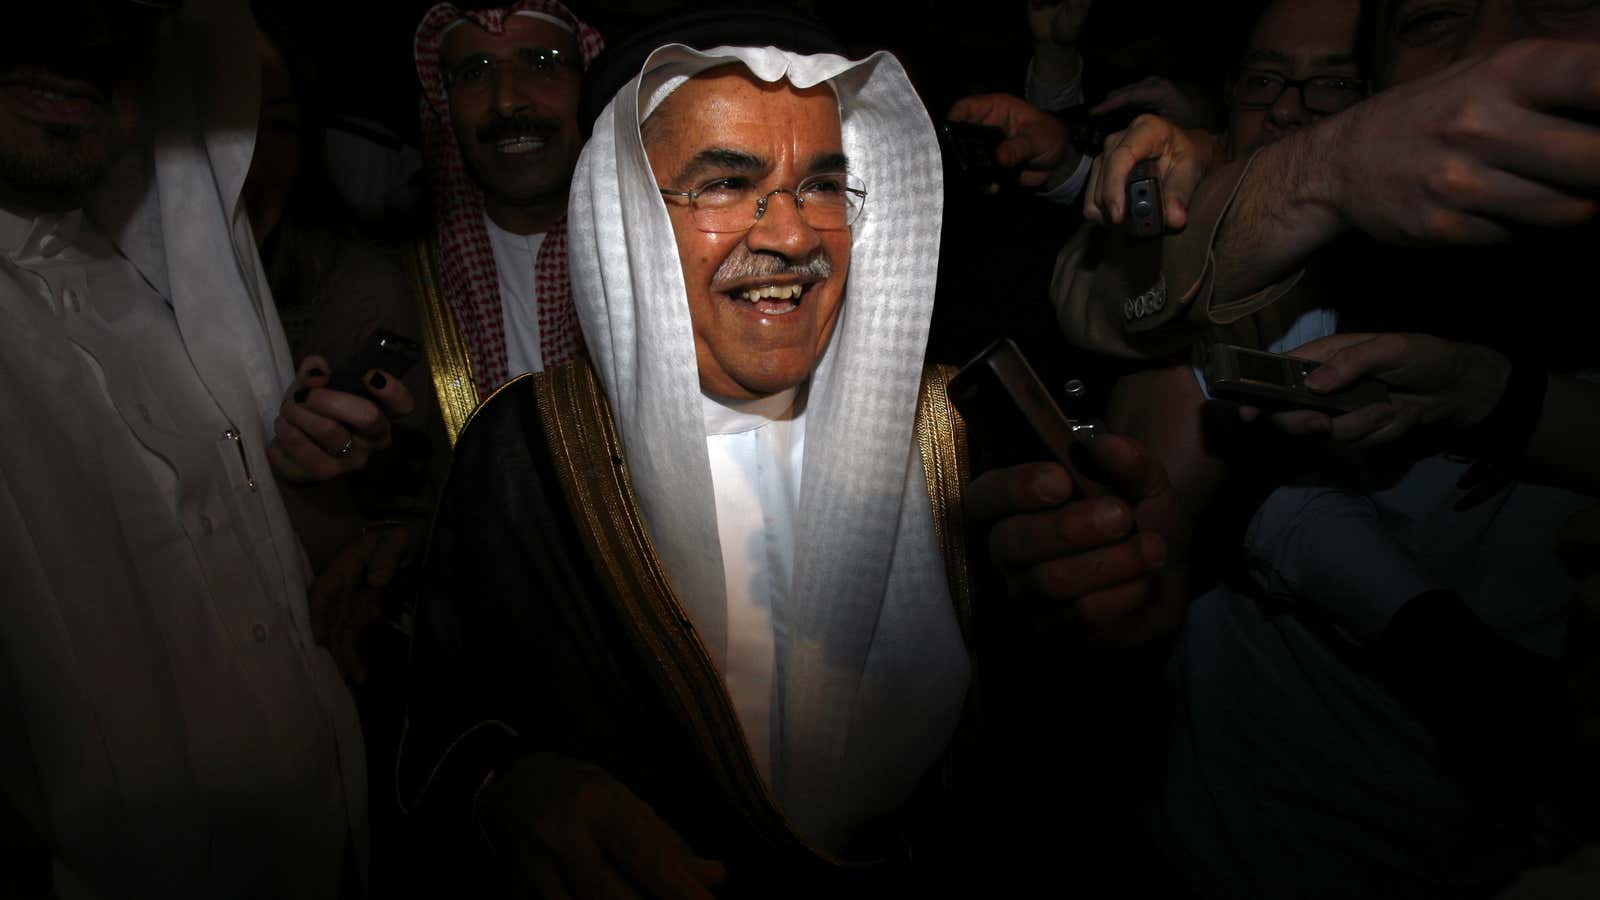 When the world was his: Naimi in 2007.